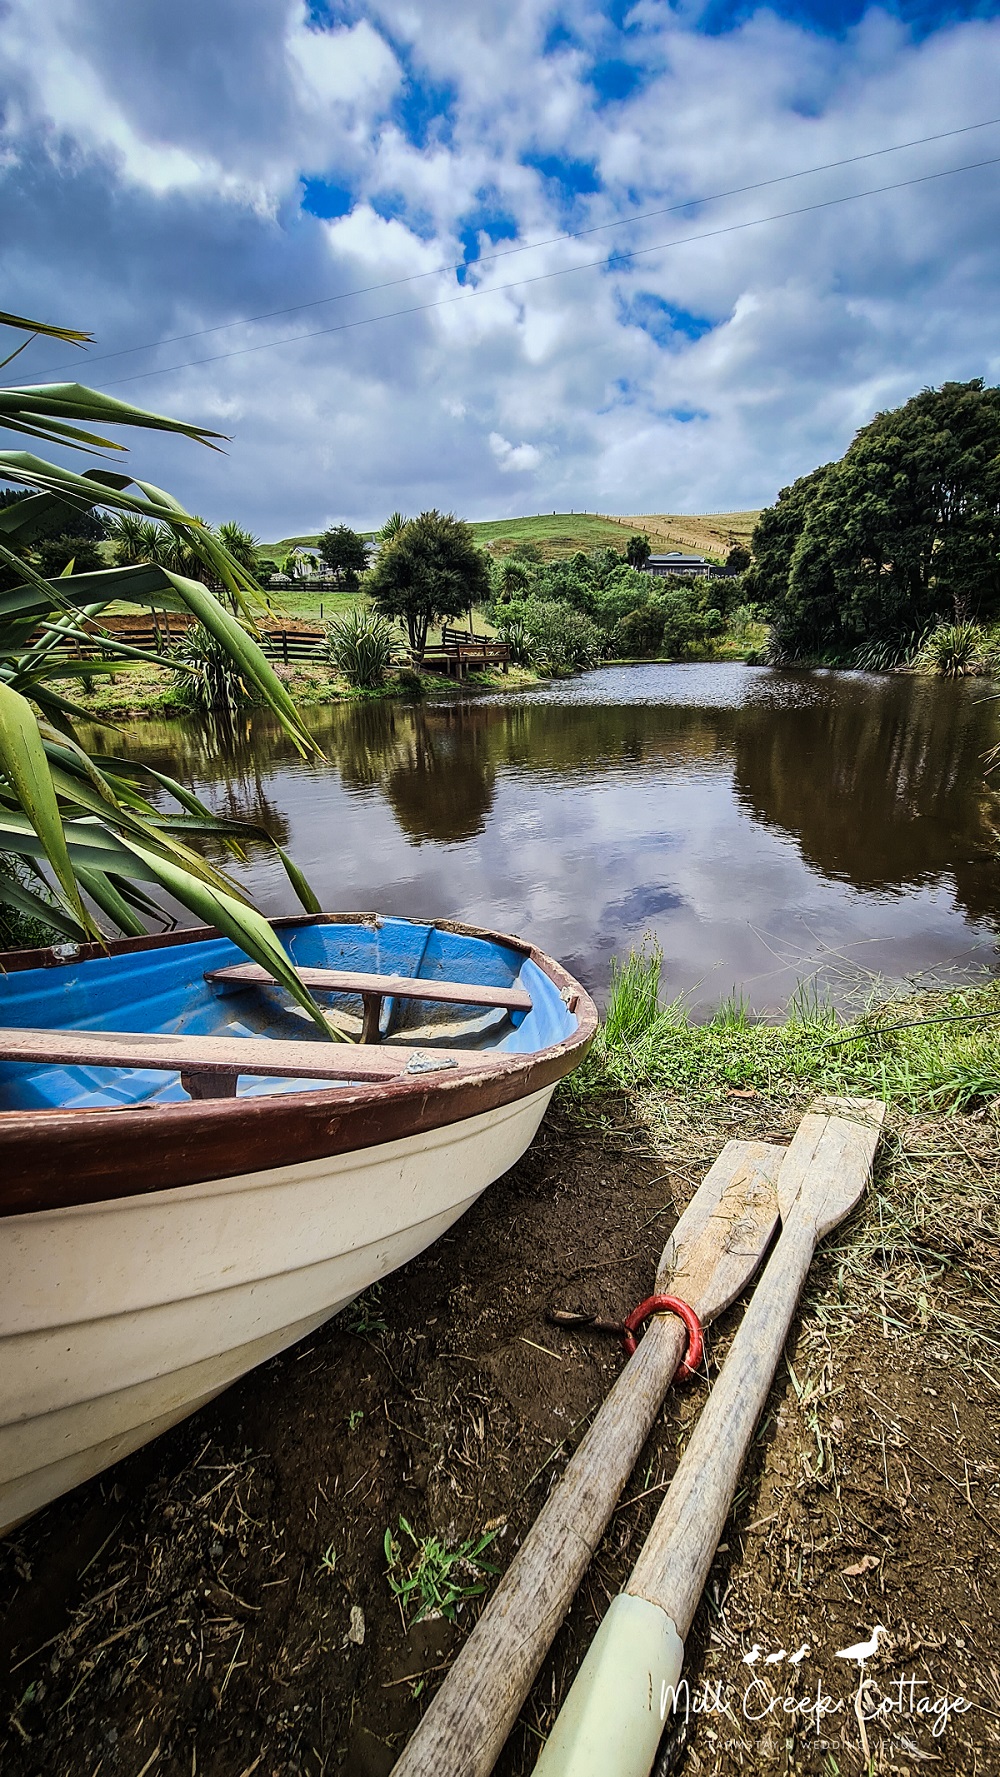 The pond and dinghy